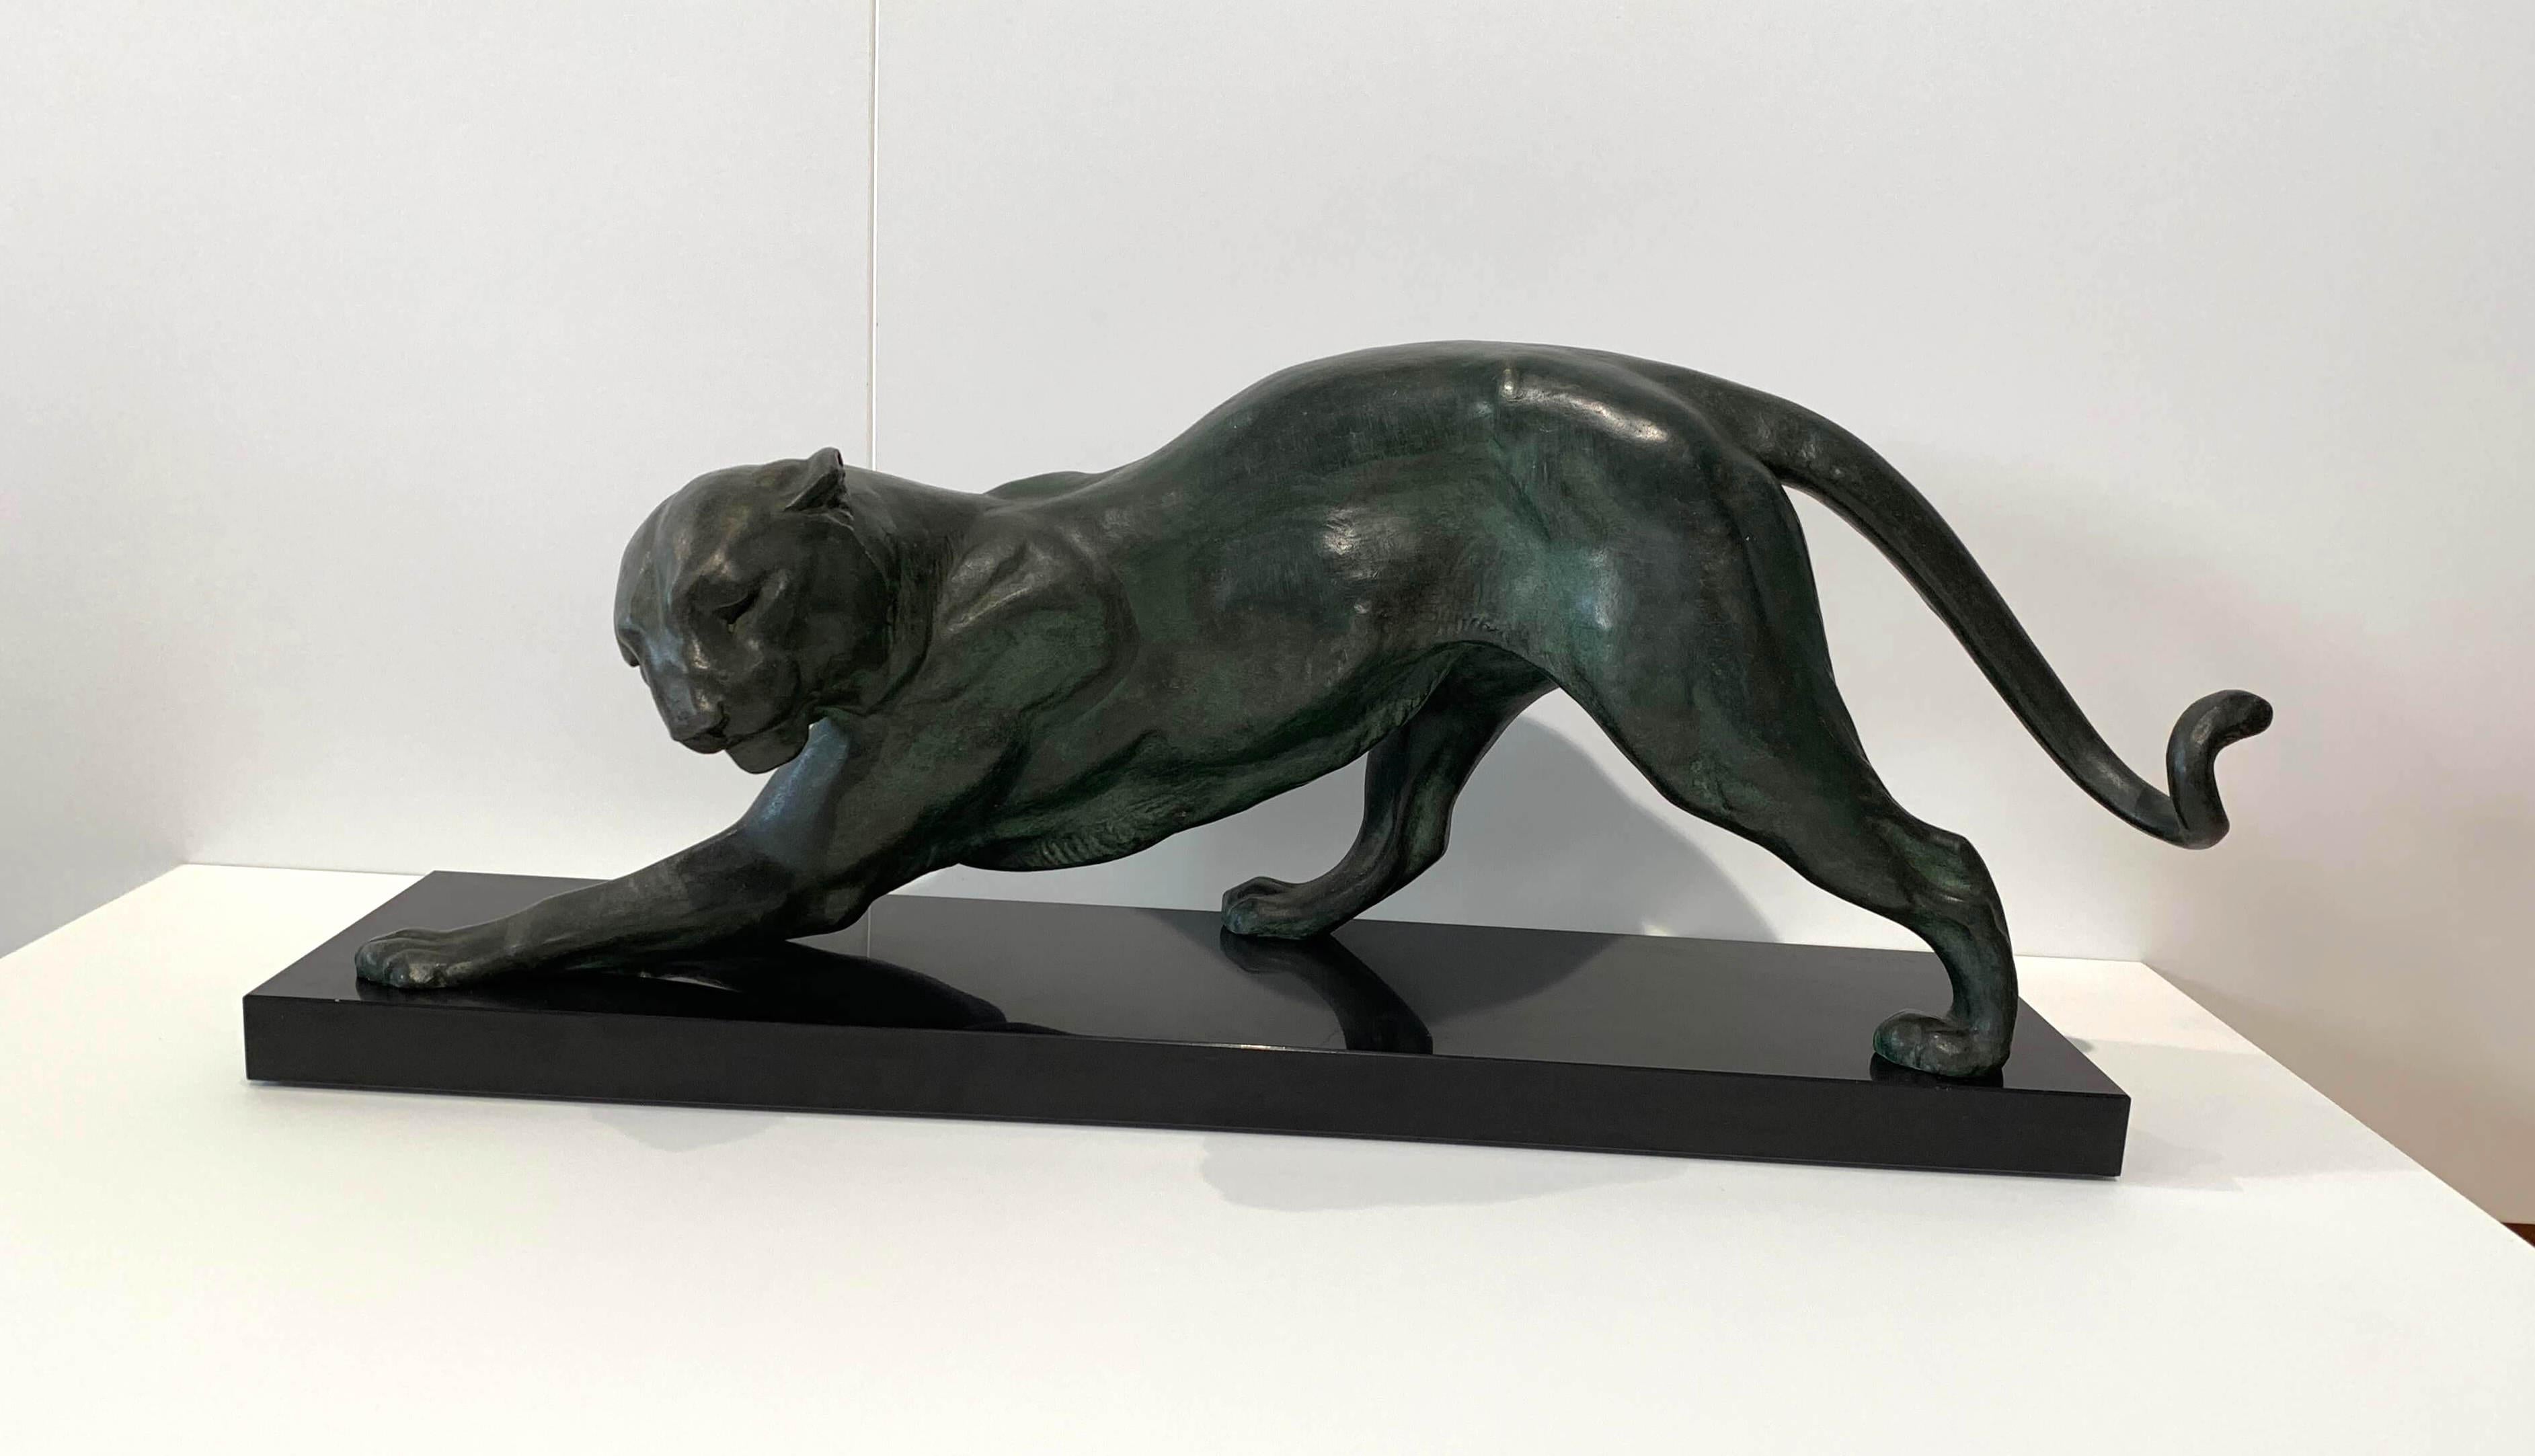 Large, very elegant original Art Deco Panther sculpture from France around 1925.
Signed: Plagnet, French artist active between 1920-1930
The animal is made of white bronze / cast zinc („fonte d‘art“) with a beautiful greenish patina.
It stands on